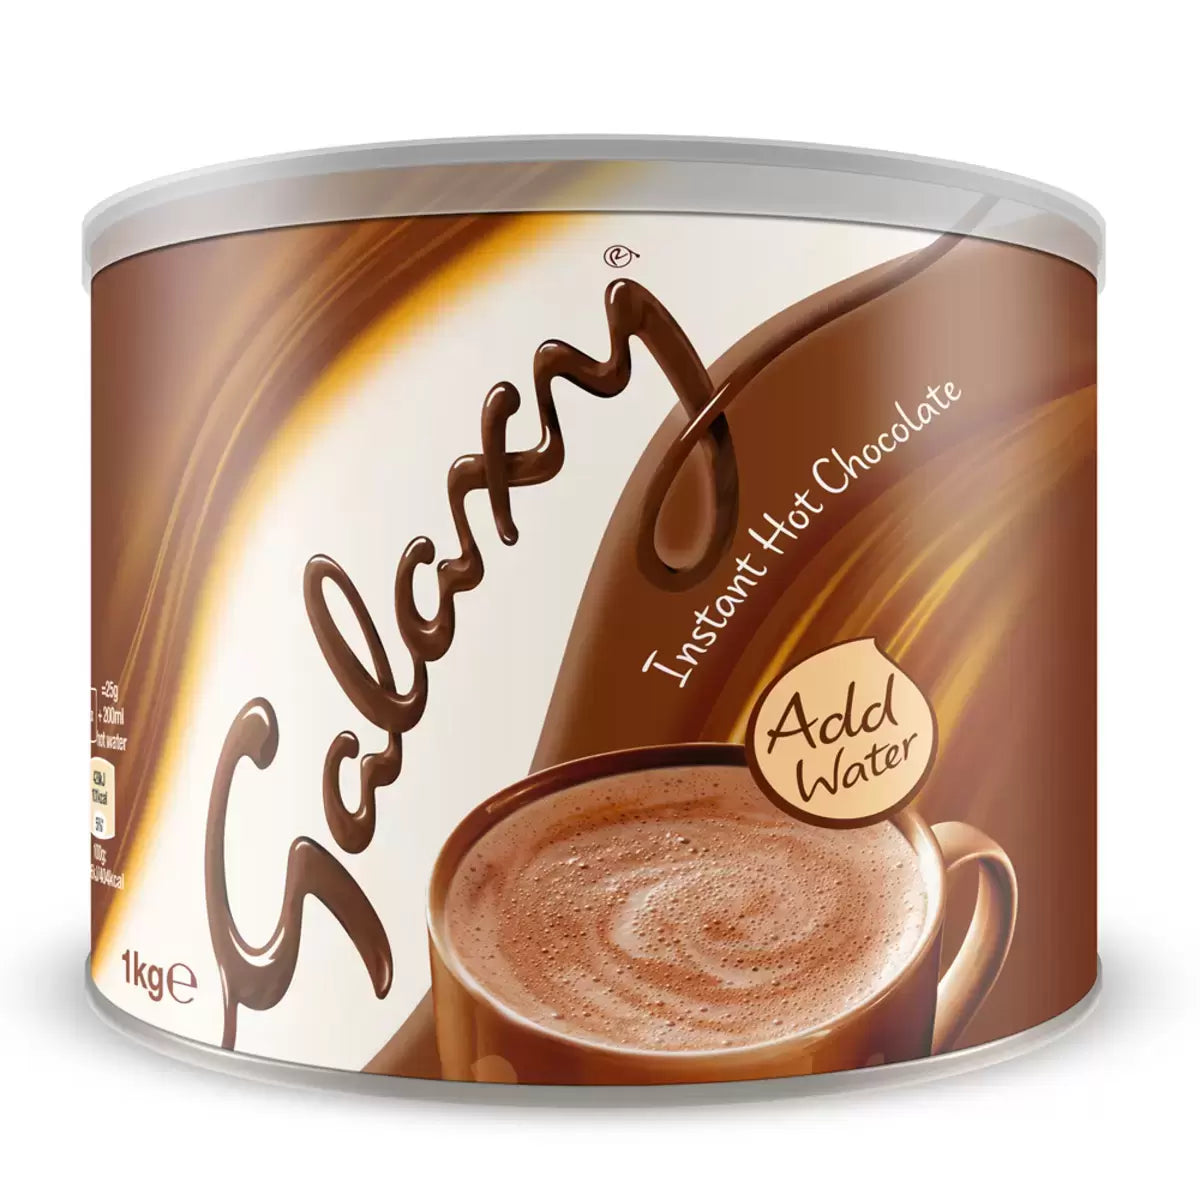 Galaxy Instant Hot Chocolate - 1kg